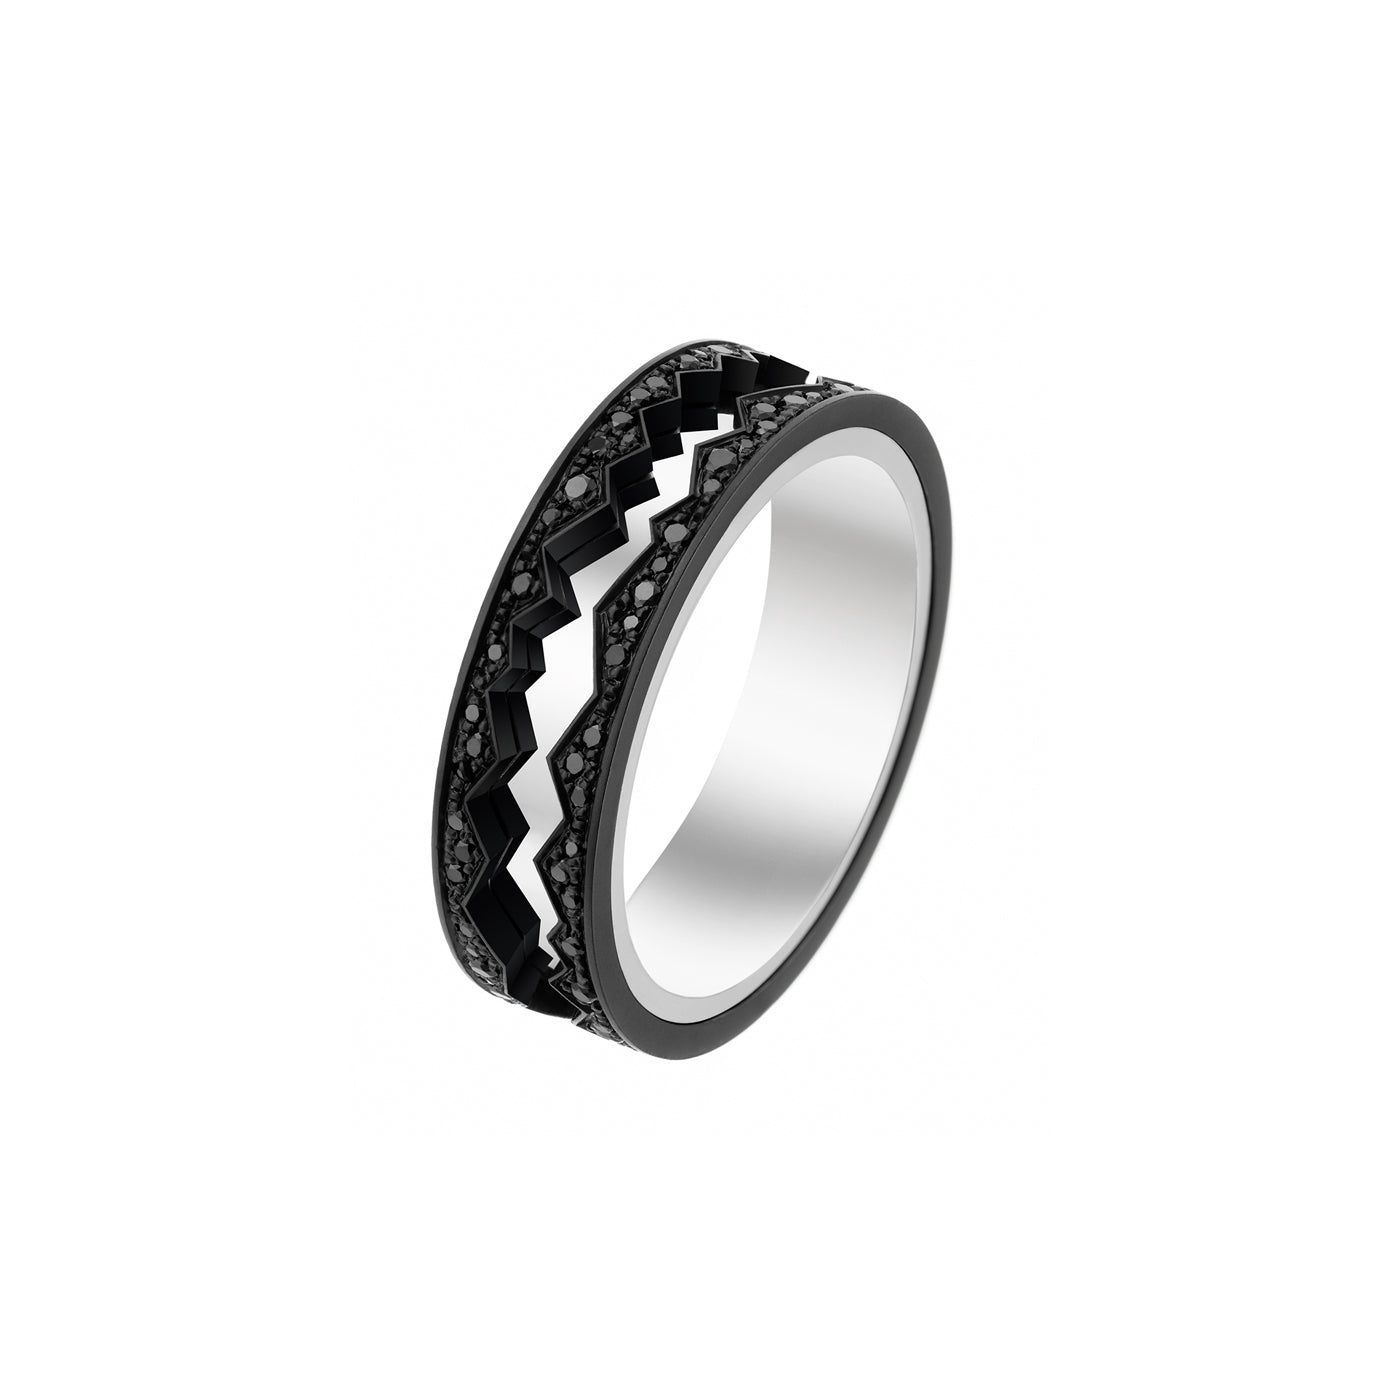 CAPTURE IN MOTION WHITE GOLD AND BLACK GOLD BLACK DIAMOND RING